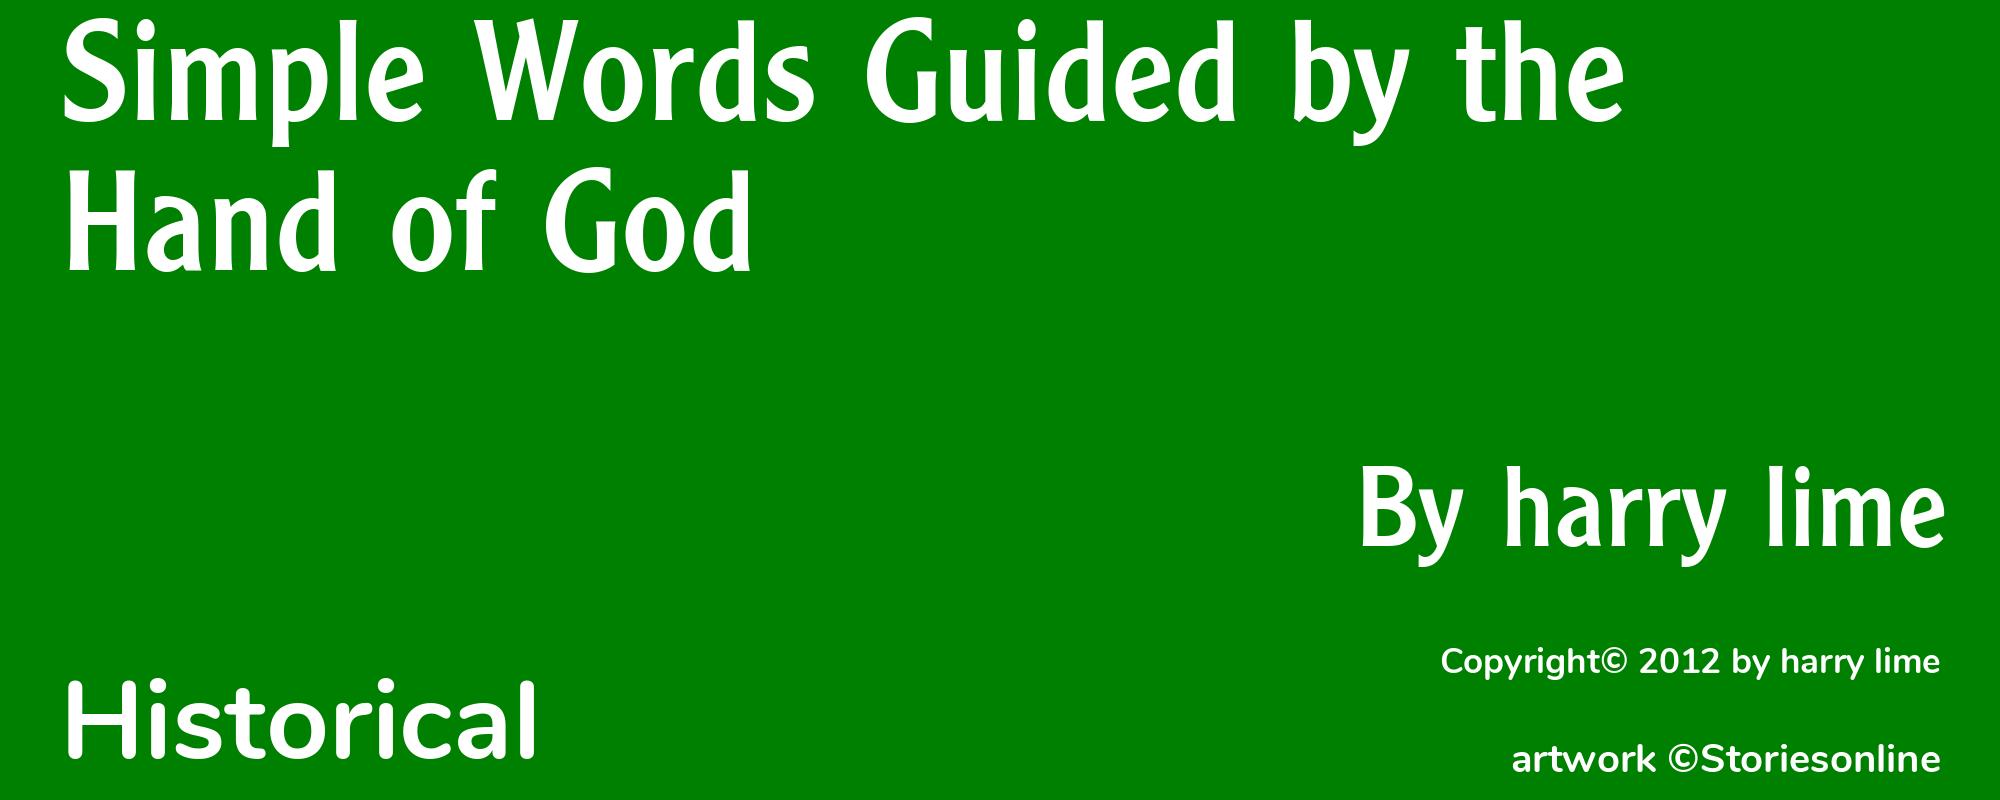 Simple Words Guided by the Hand of God - Cover